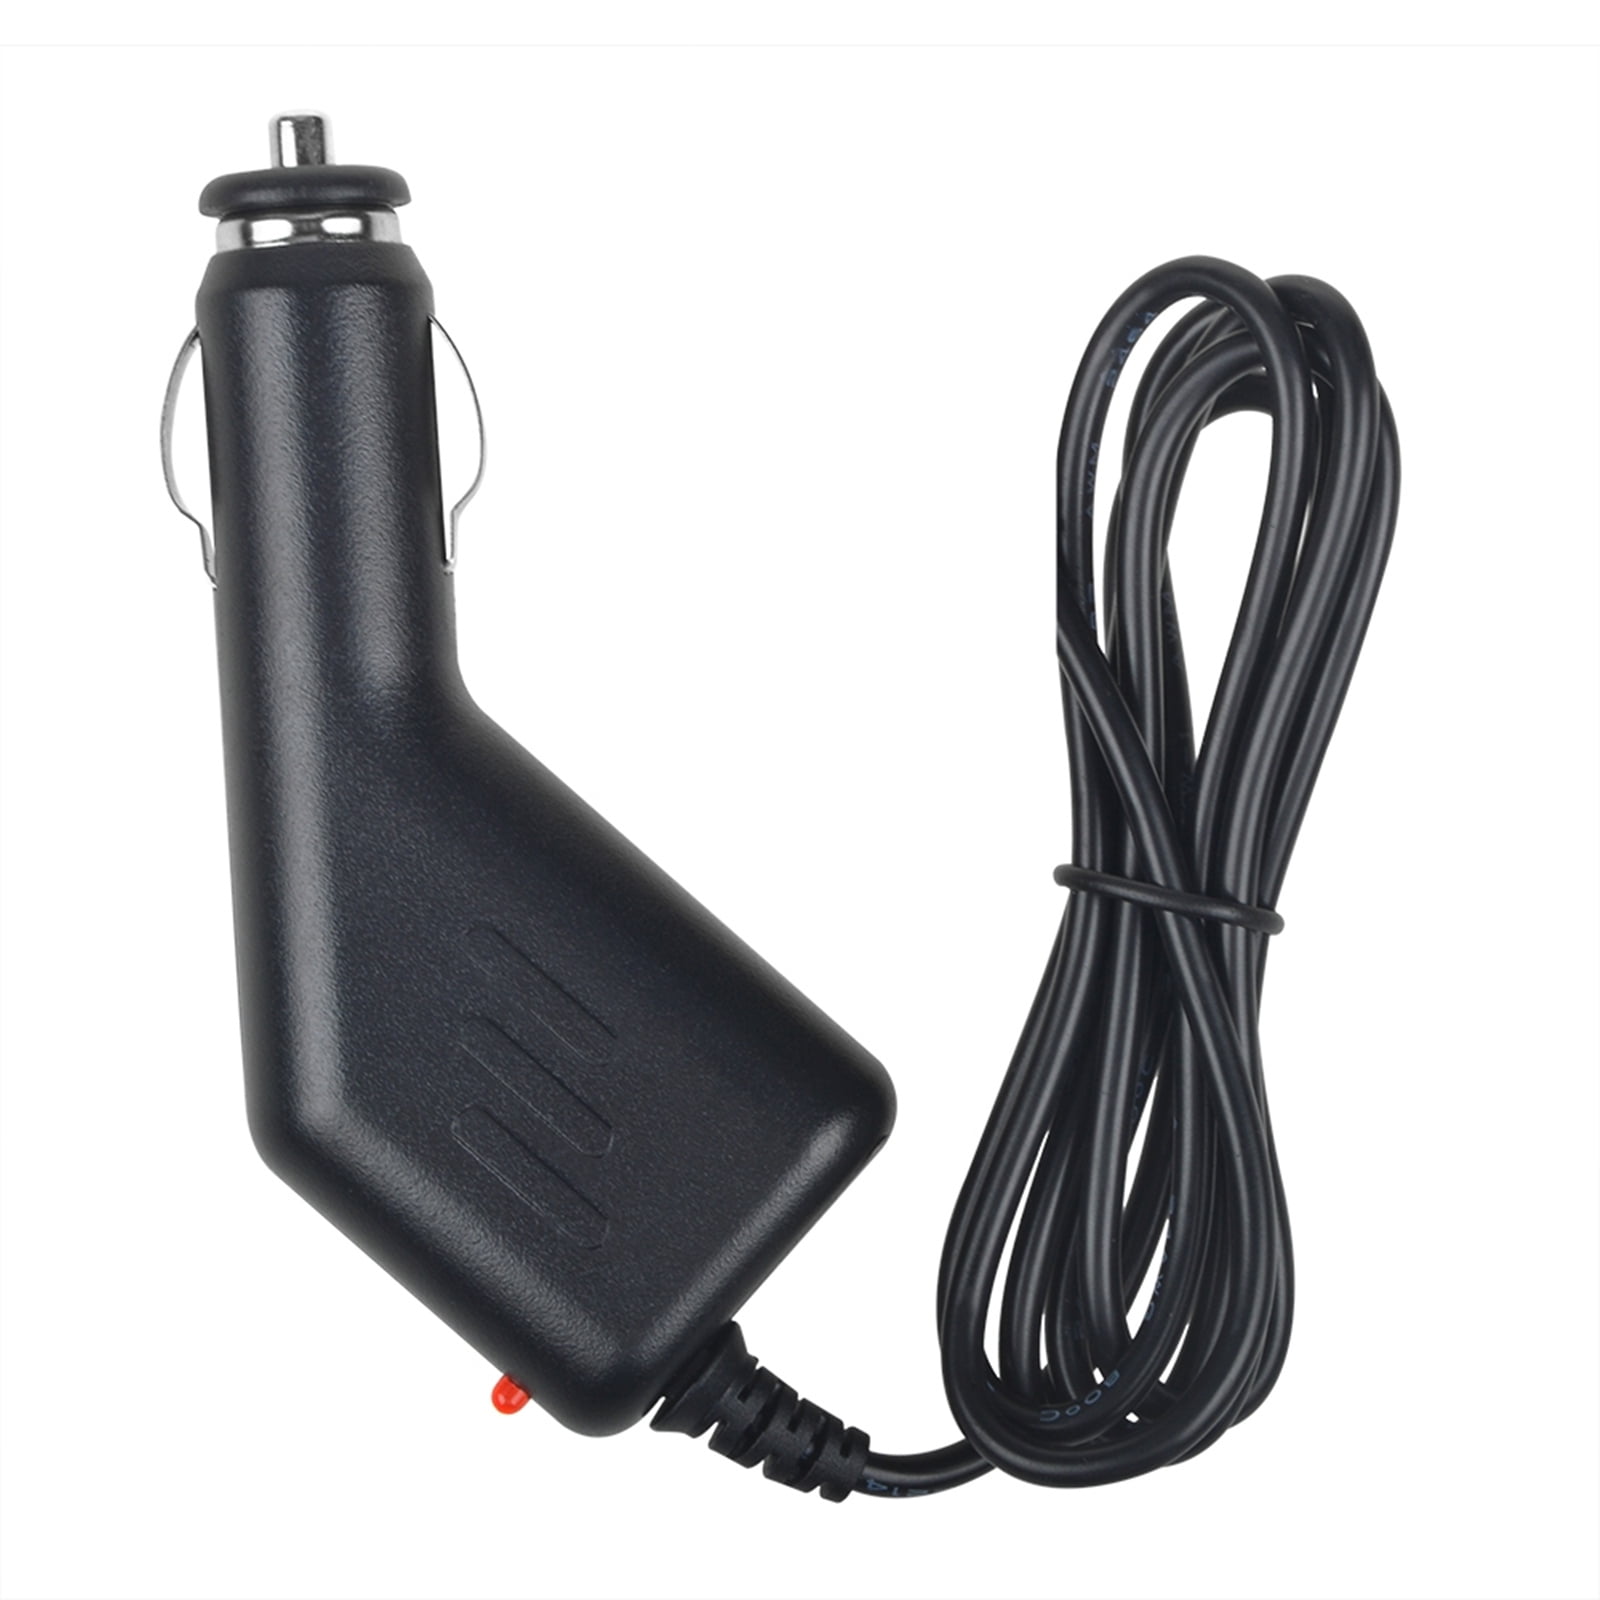 downpour astronomy Classic KONKIN BOO Compatible Car DC Adapter Replacement for Philips EXP2546/12  EXP2546/05 EXP2546 12 EXP2546 05 AY3162 Personal CD Player Auto Vehicle  Boat RV CamperPlug Power Supply Cord Battery Charger - Walmart.com